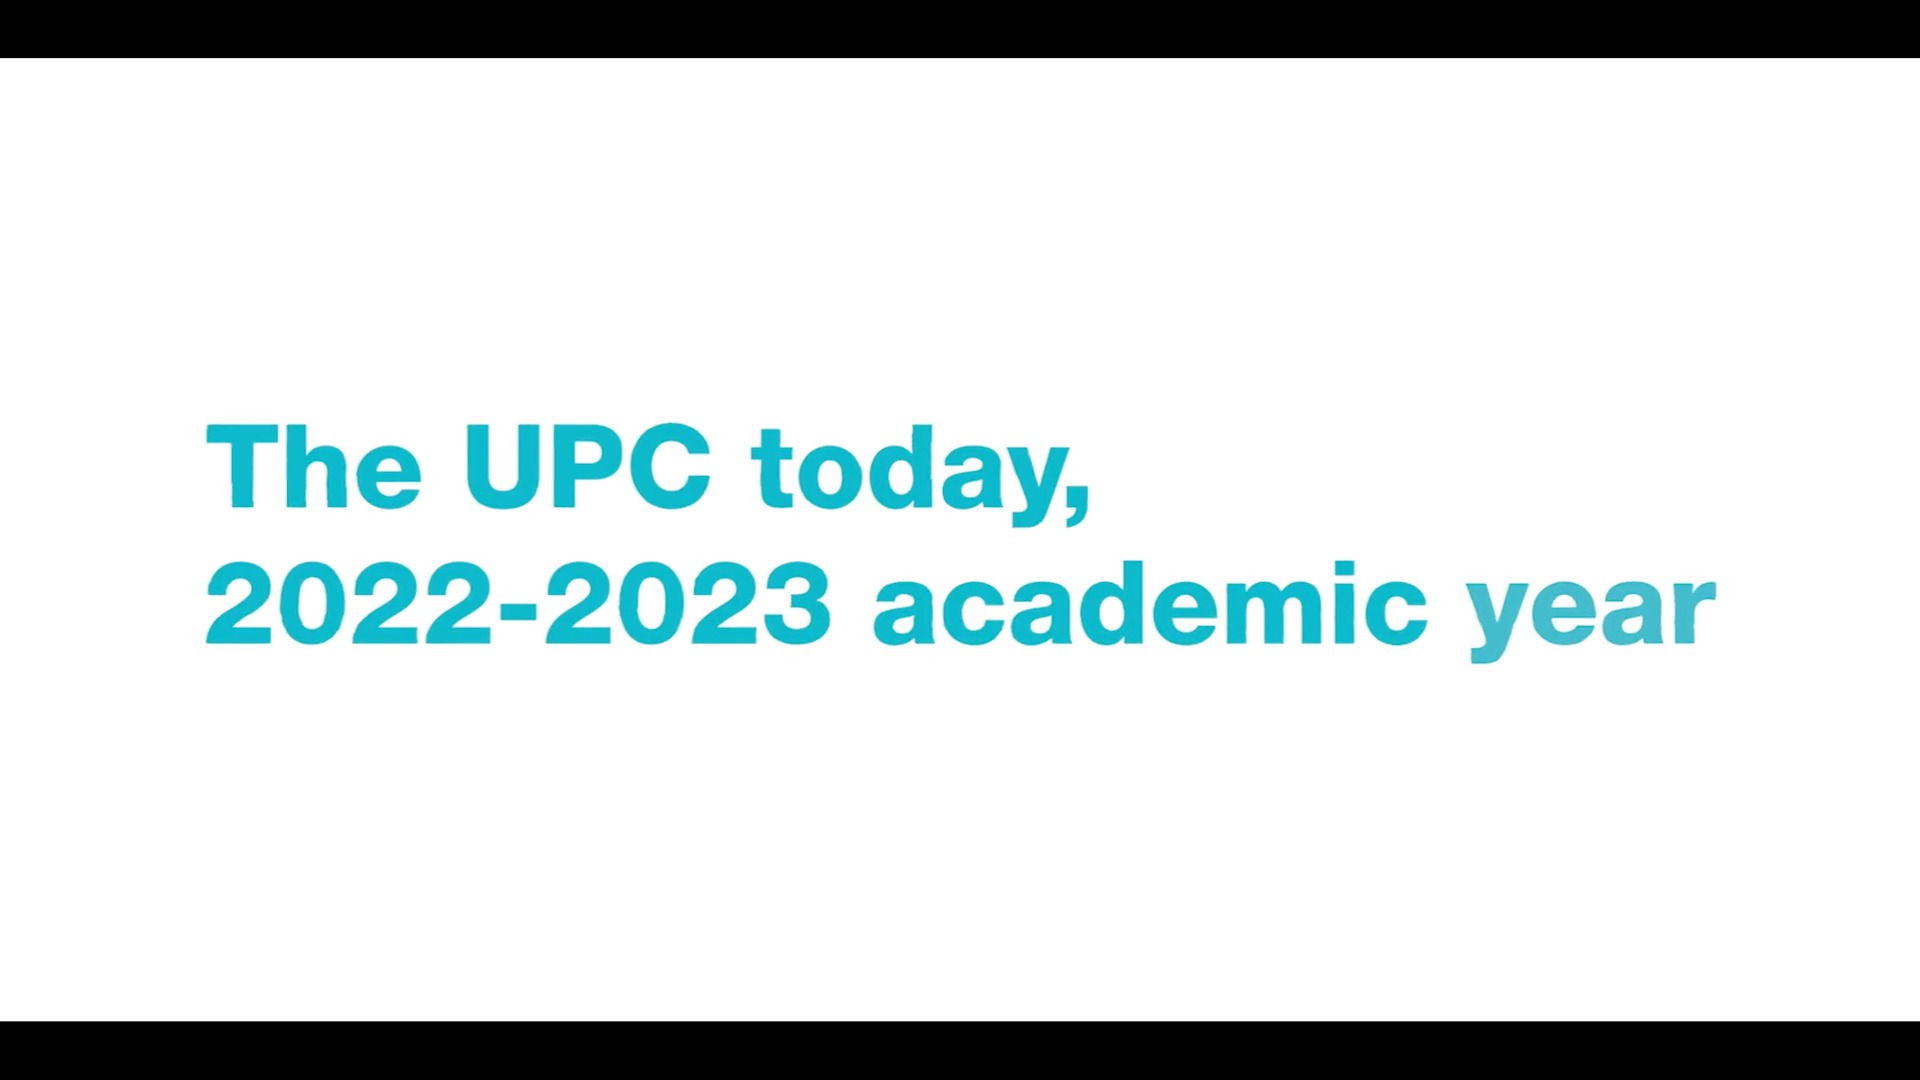 The UPC today, 2022-2023 academic year